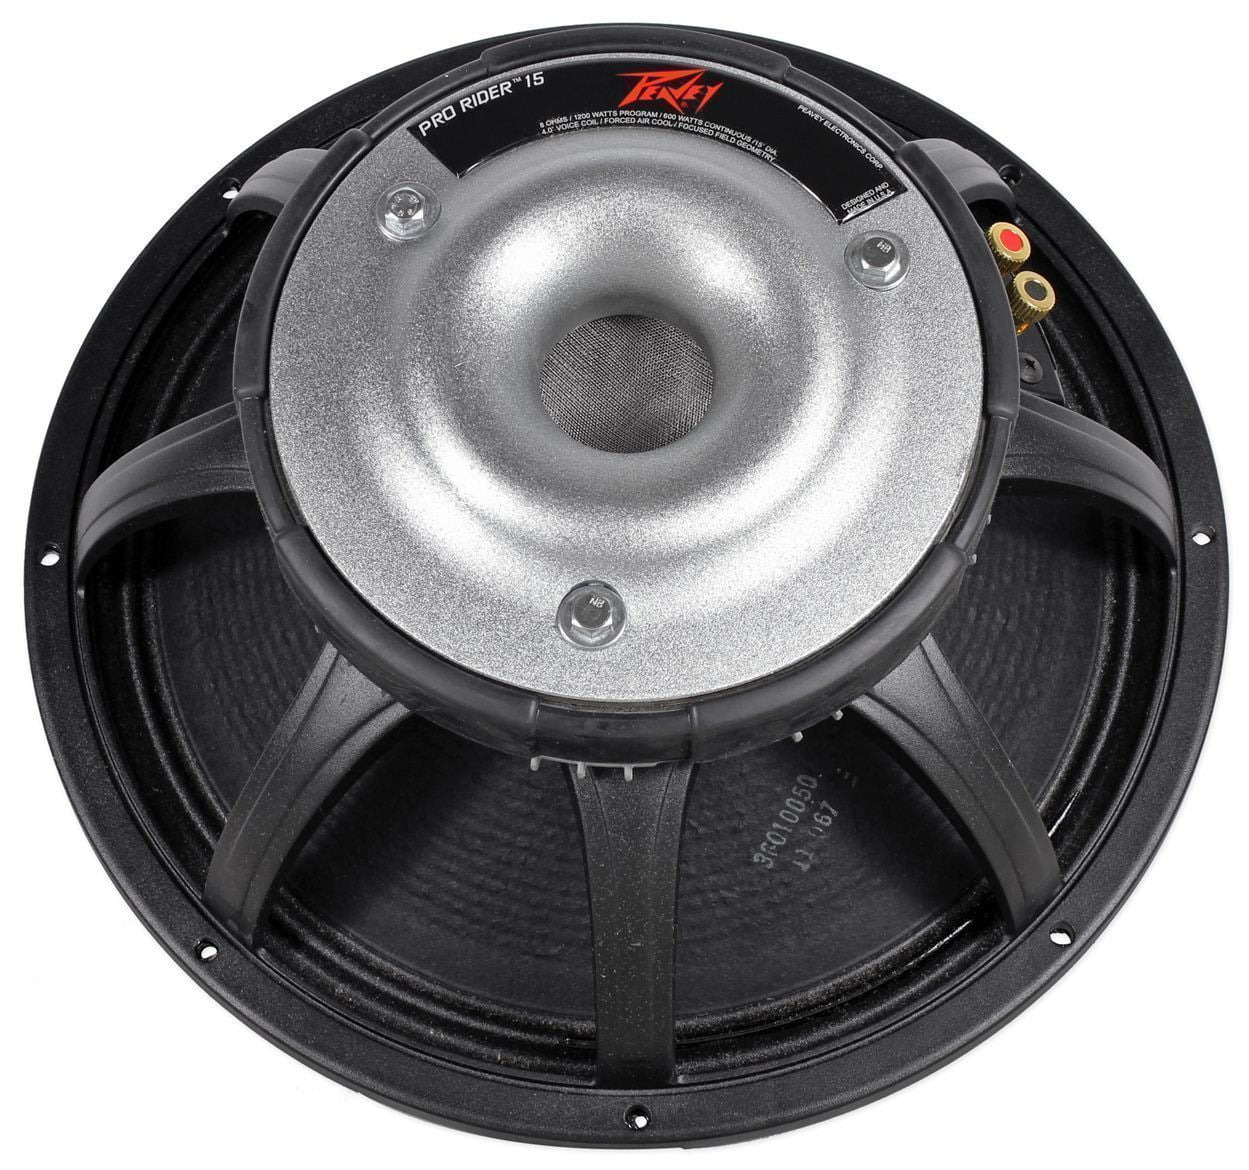 Peavey 15 8 Ohm 3200 Watt Peak/800 Watt RMS Low Rider Pro Audio Subwoofer Raw Driver with Extra-Long Cone Excursion 